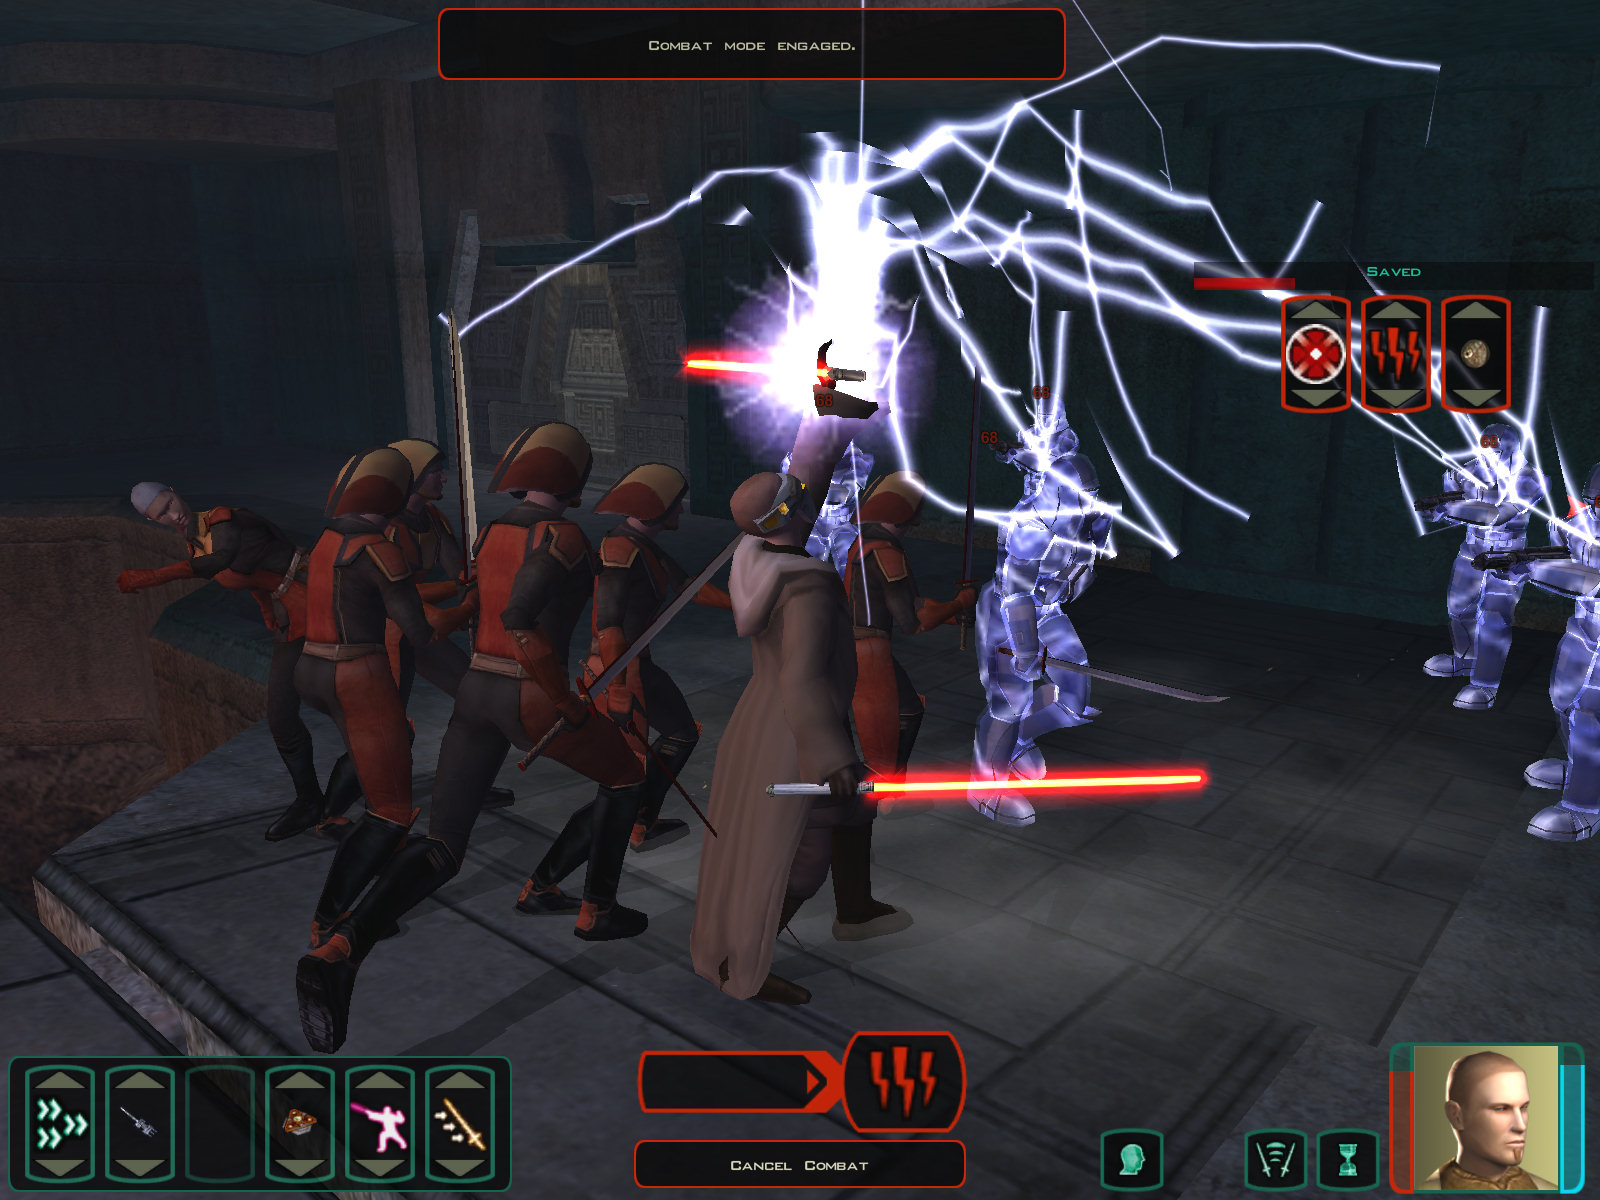 Star Wars: Knights of the Old Republic II - The Sith Lords Image Gallery.